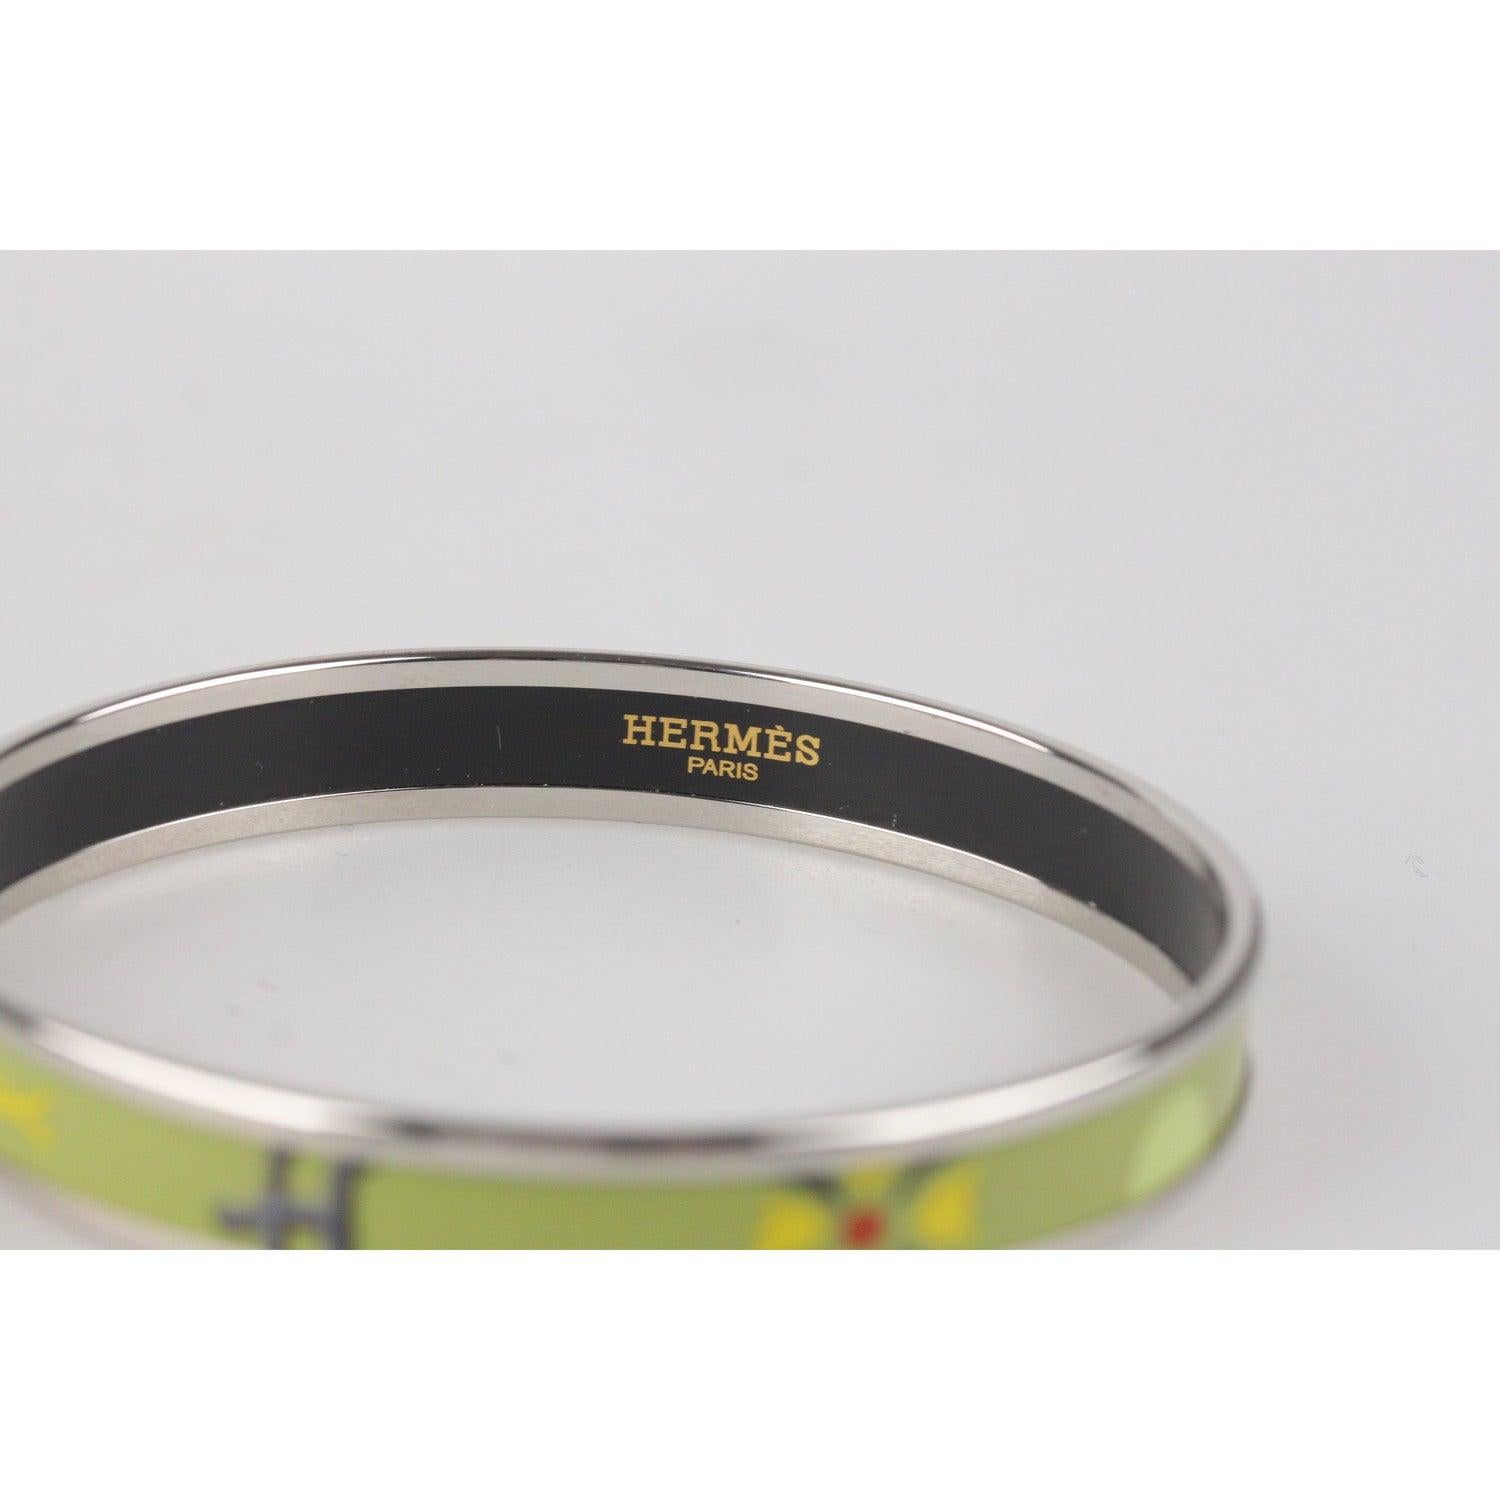 Hermes Enamel Green Narrow Bangle Bracelet Palladium Plated Rim In Excellent Condition In Rome, Rome